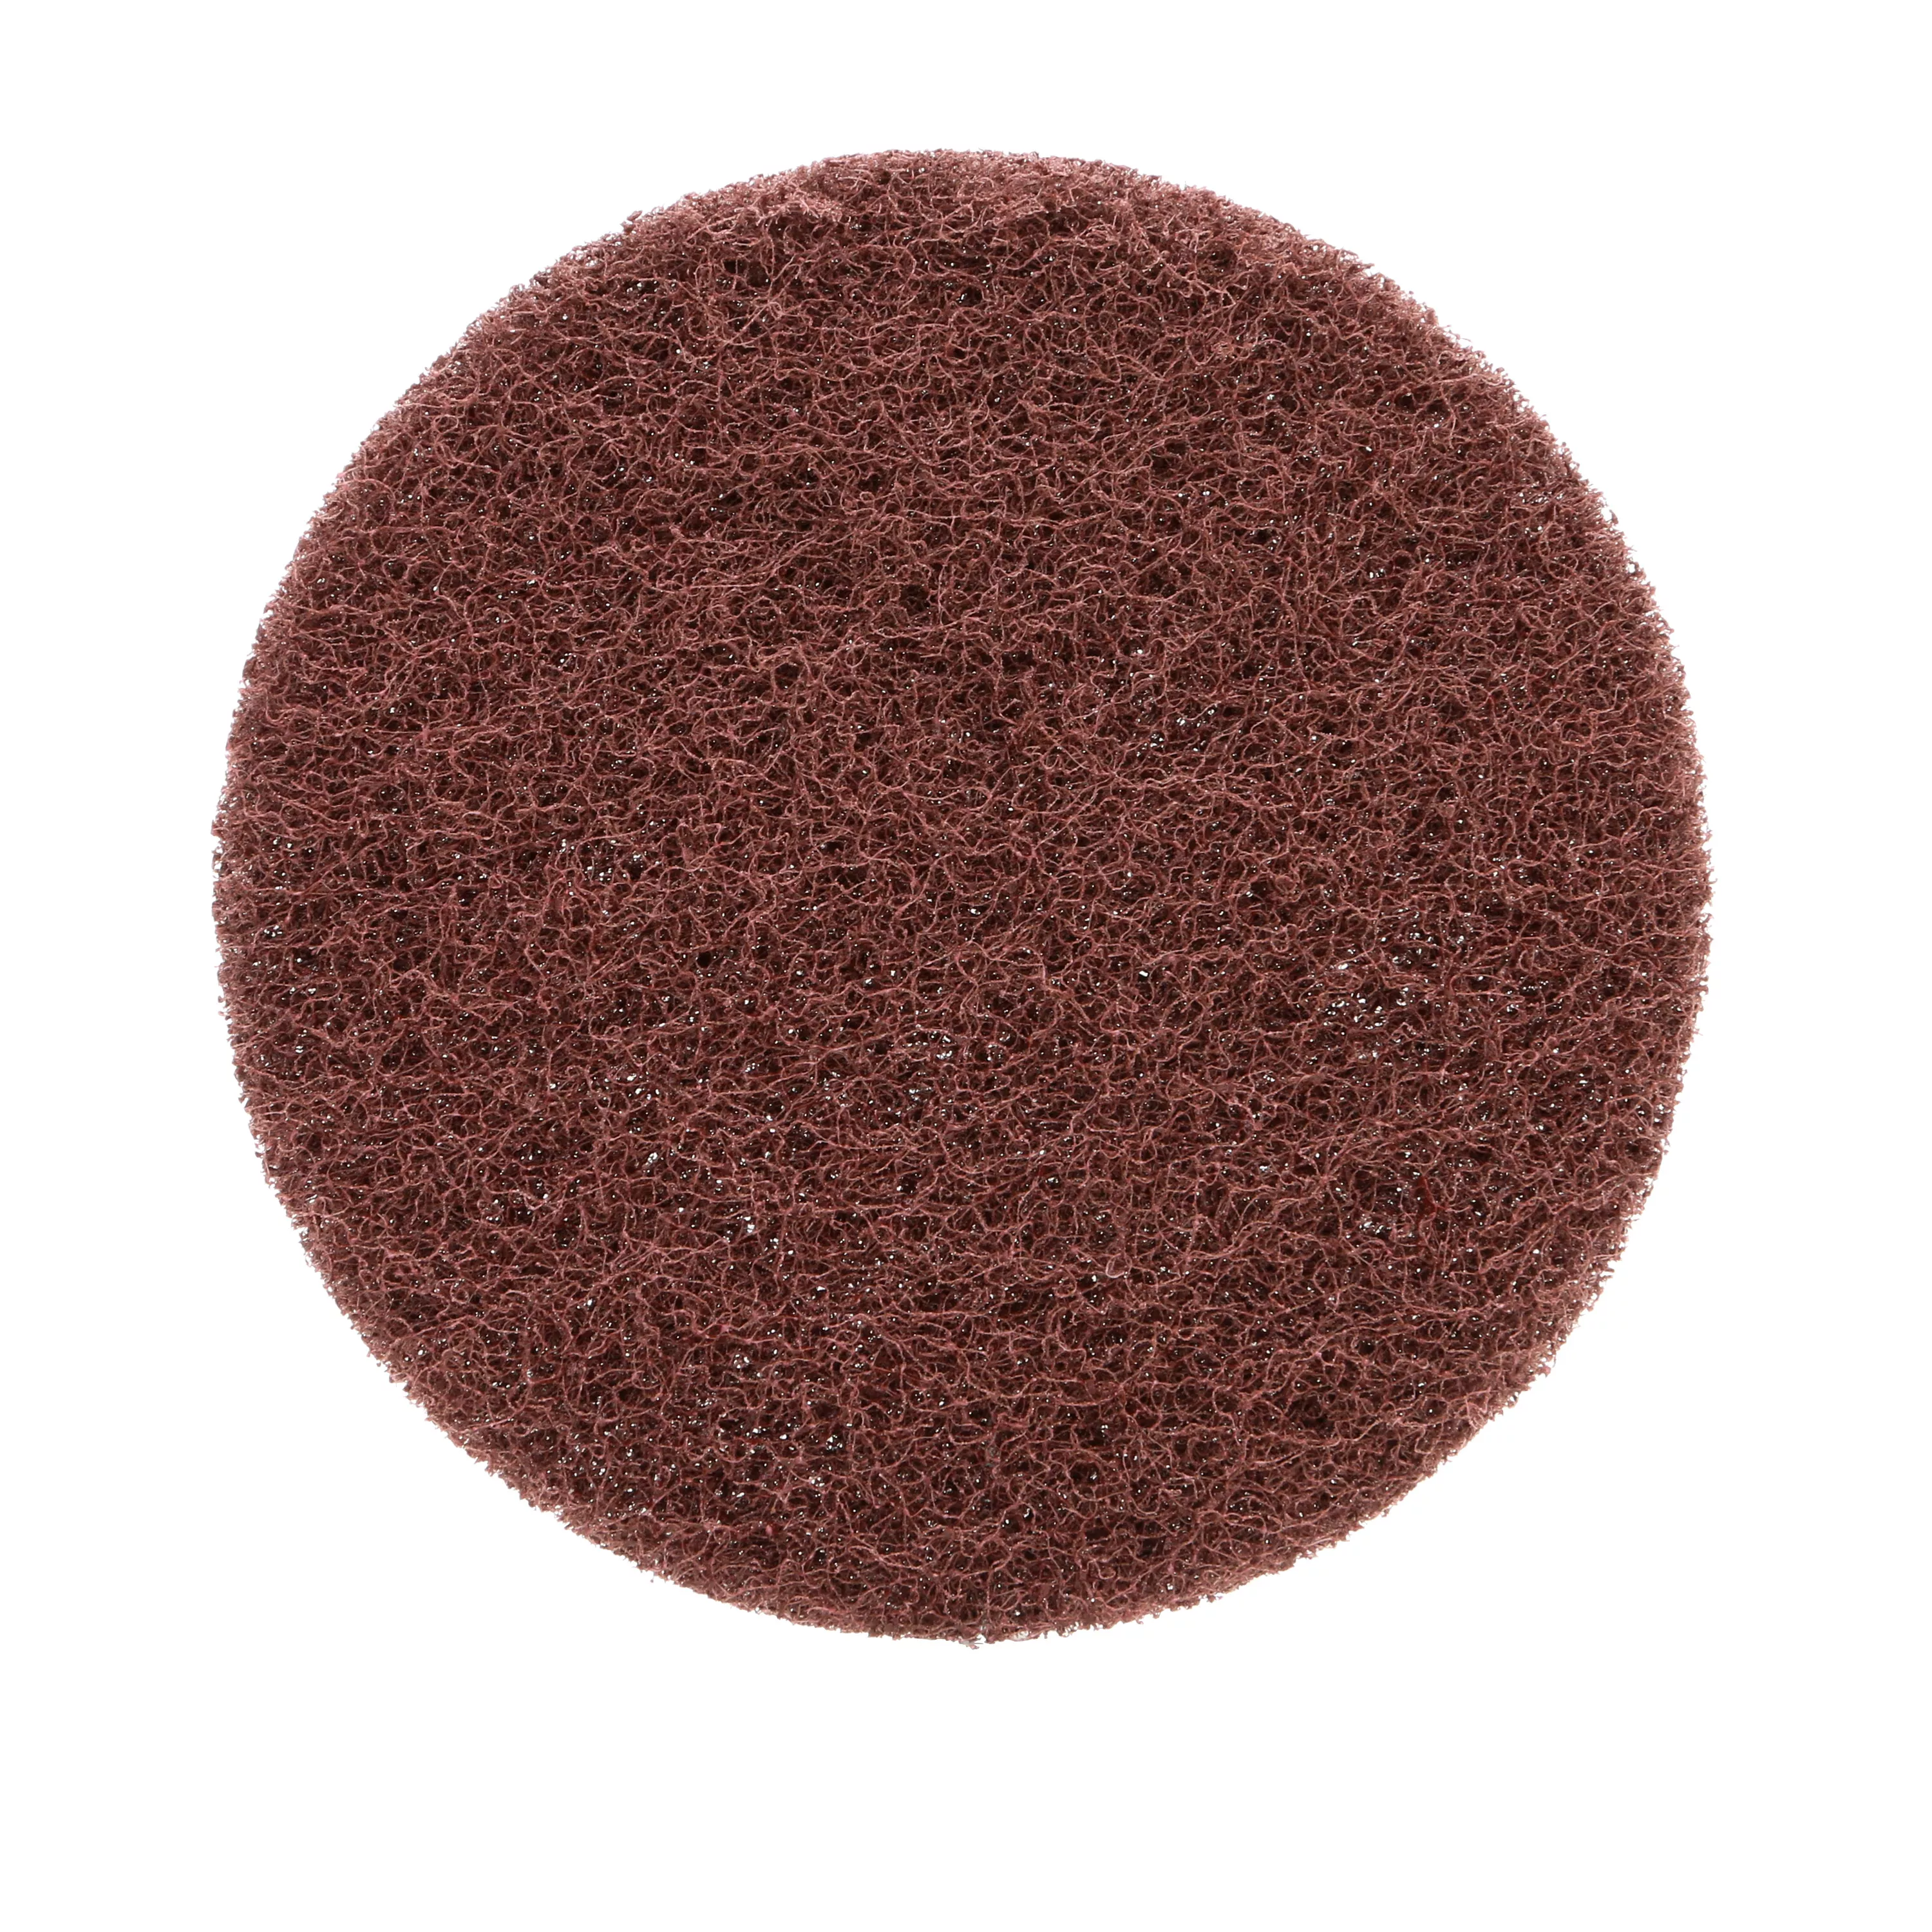 Standard Abrasives™ Buff and Blend Hook and Loop GP Disc 831610, 5 in A
MED, 10/Pac, 100 ea/Case